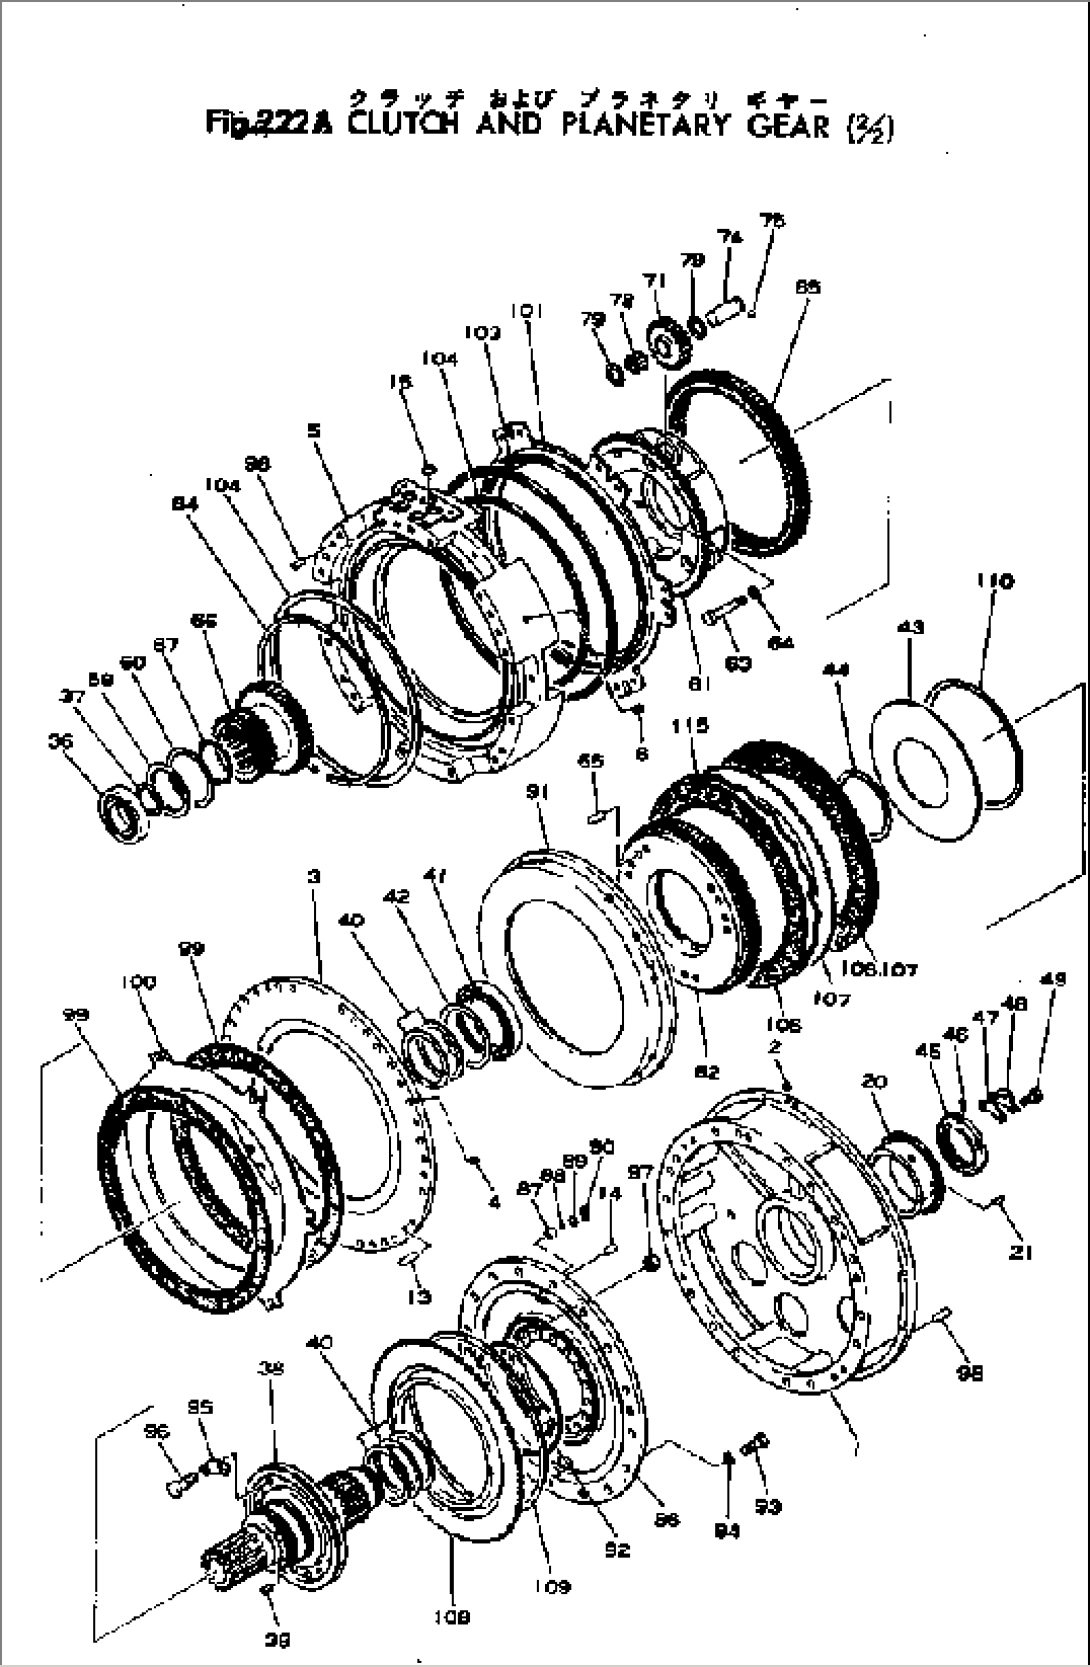 CLUTCH AND PLANETARY GEAR (2/2)